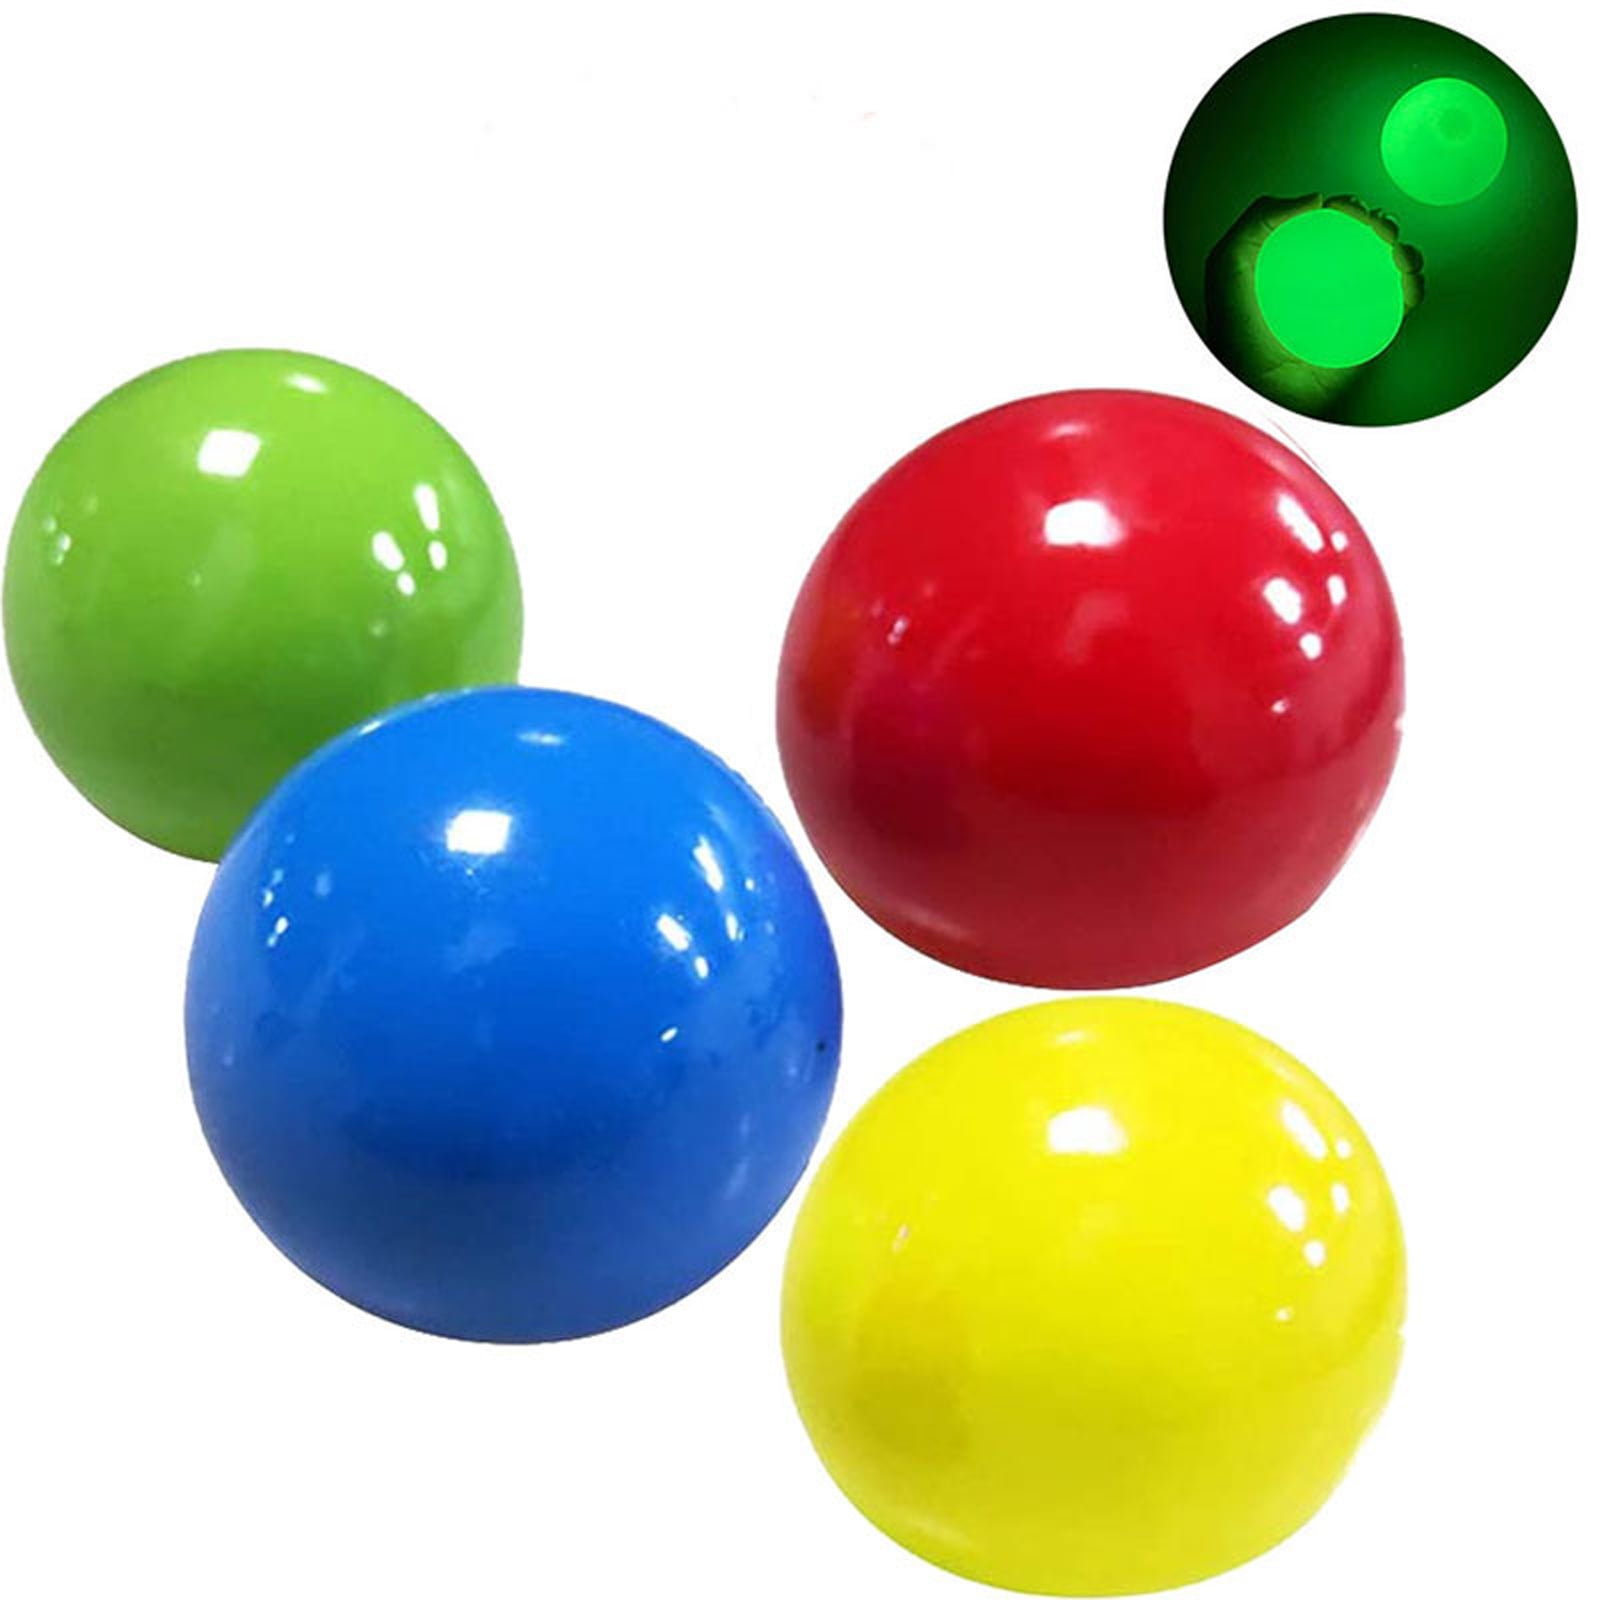 4PCS Luminous Sticky Wall Balls Ceiling Stress Relief Globbles Squishy Toys UK 